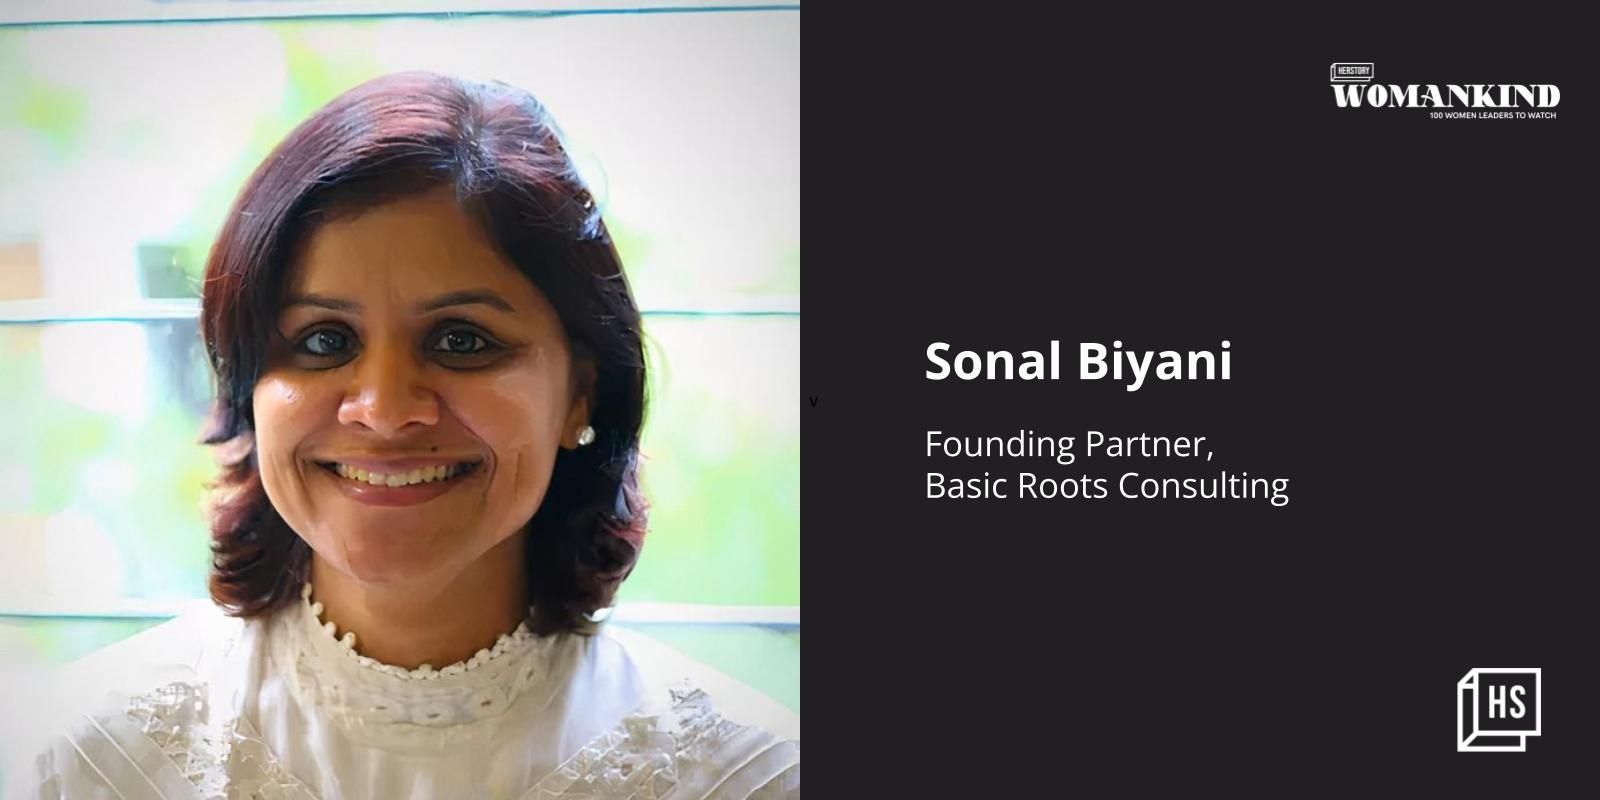 [100 Emerging Women Leaders] Meet Sonal Biyani—investment banker by day, stand-up comic by night